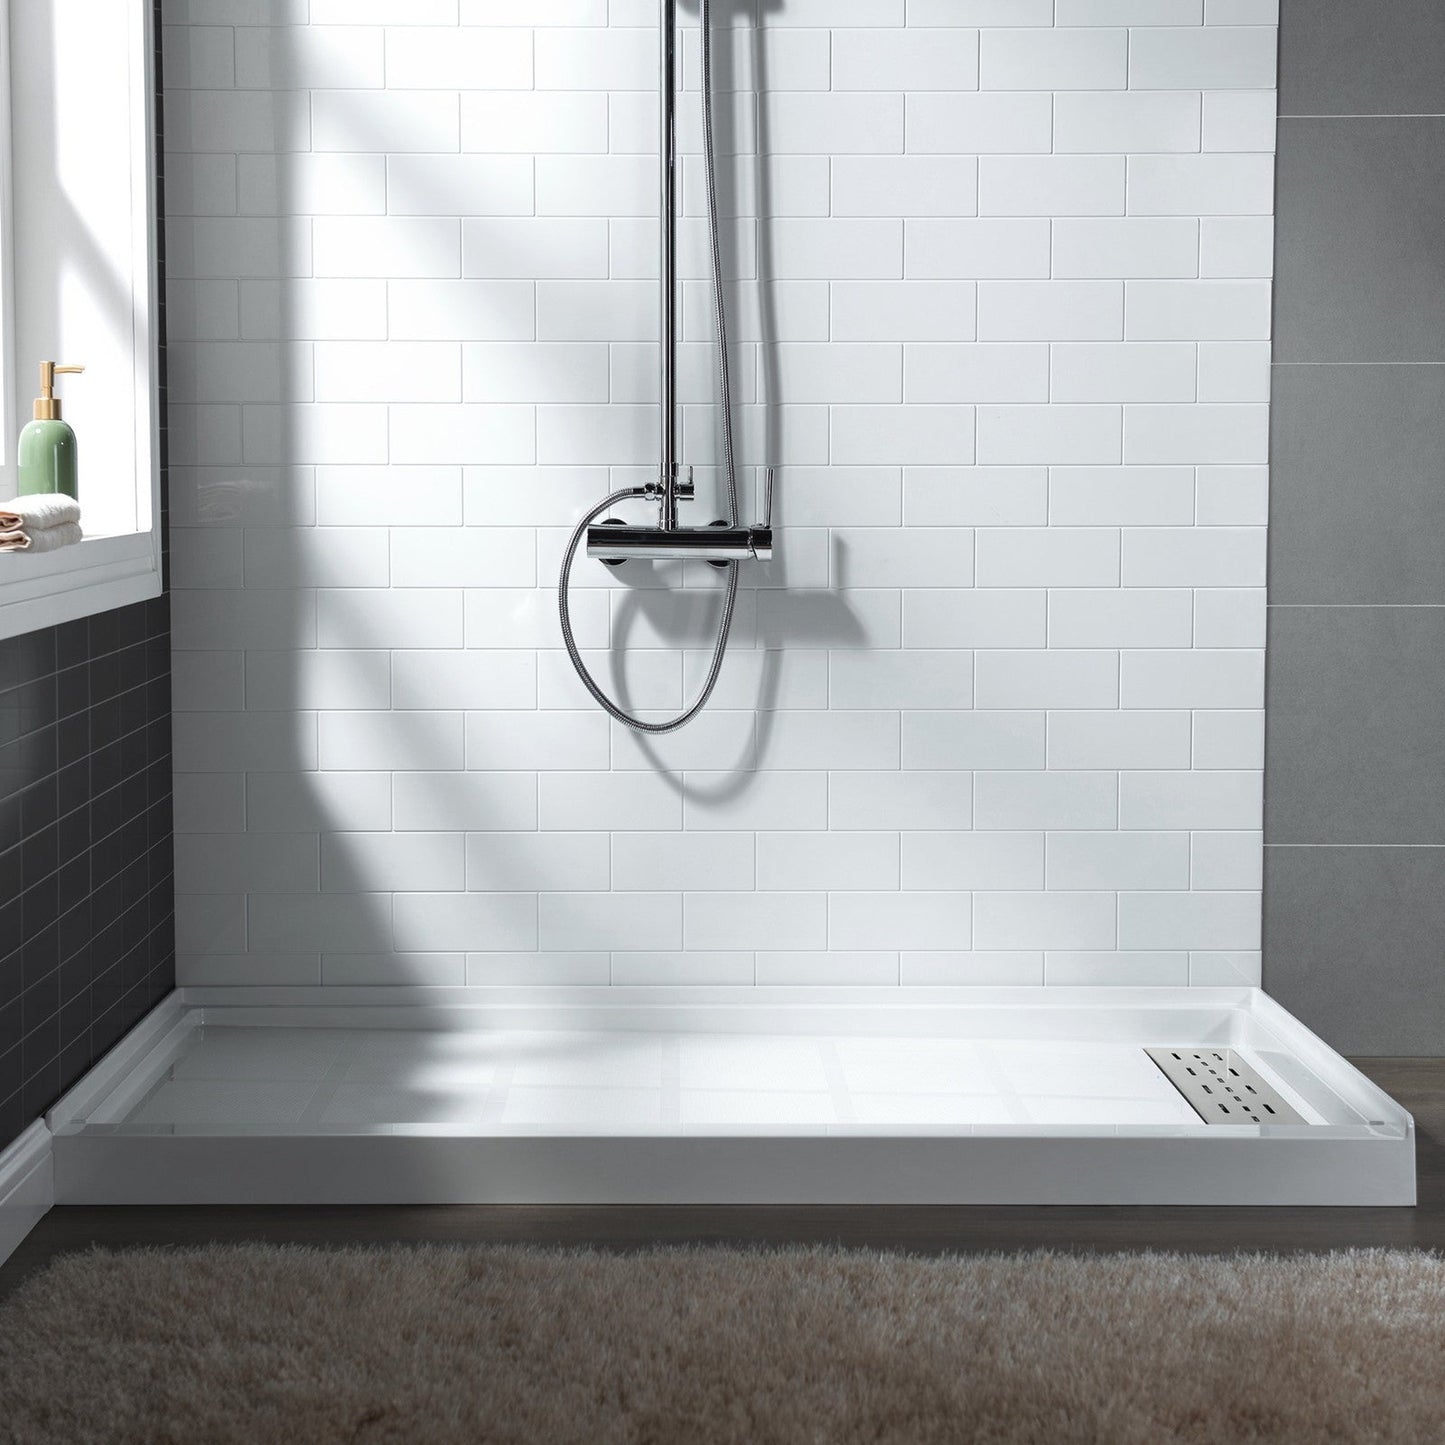 WoodBridge 60" x 32" White Solid Surface Shower Base Right Drain Location With Brushed Nickel Trench Drain Cover